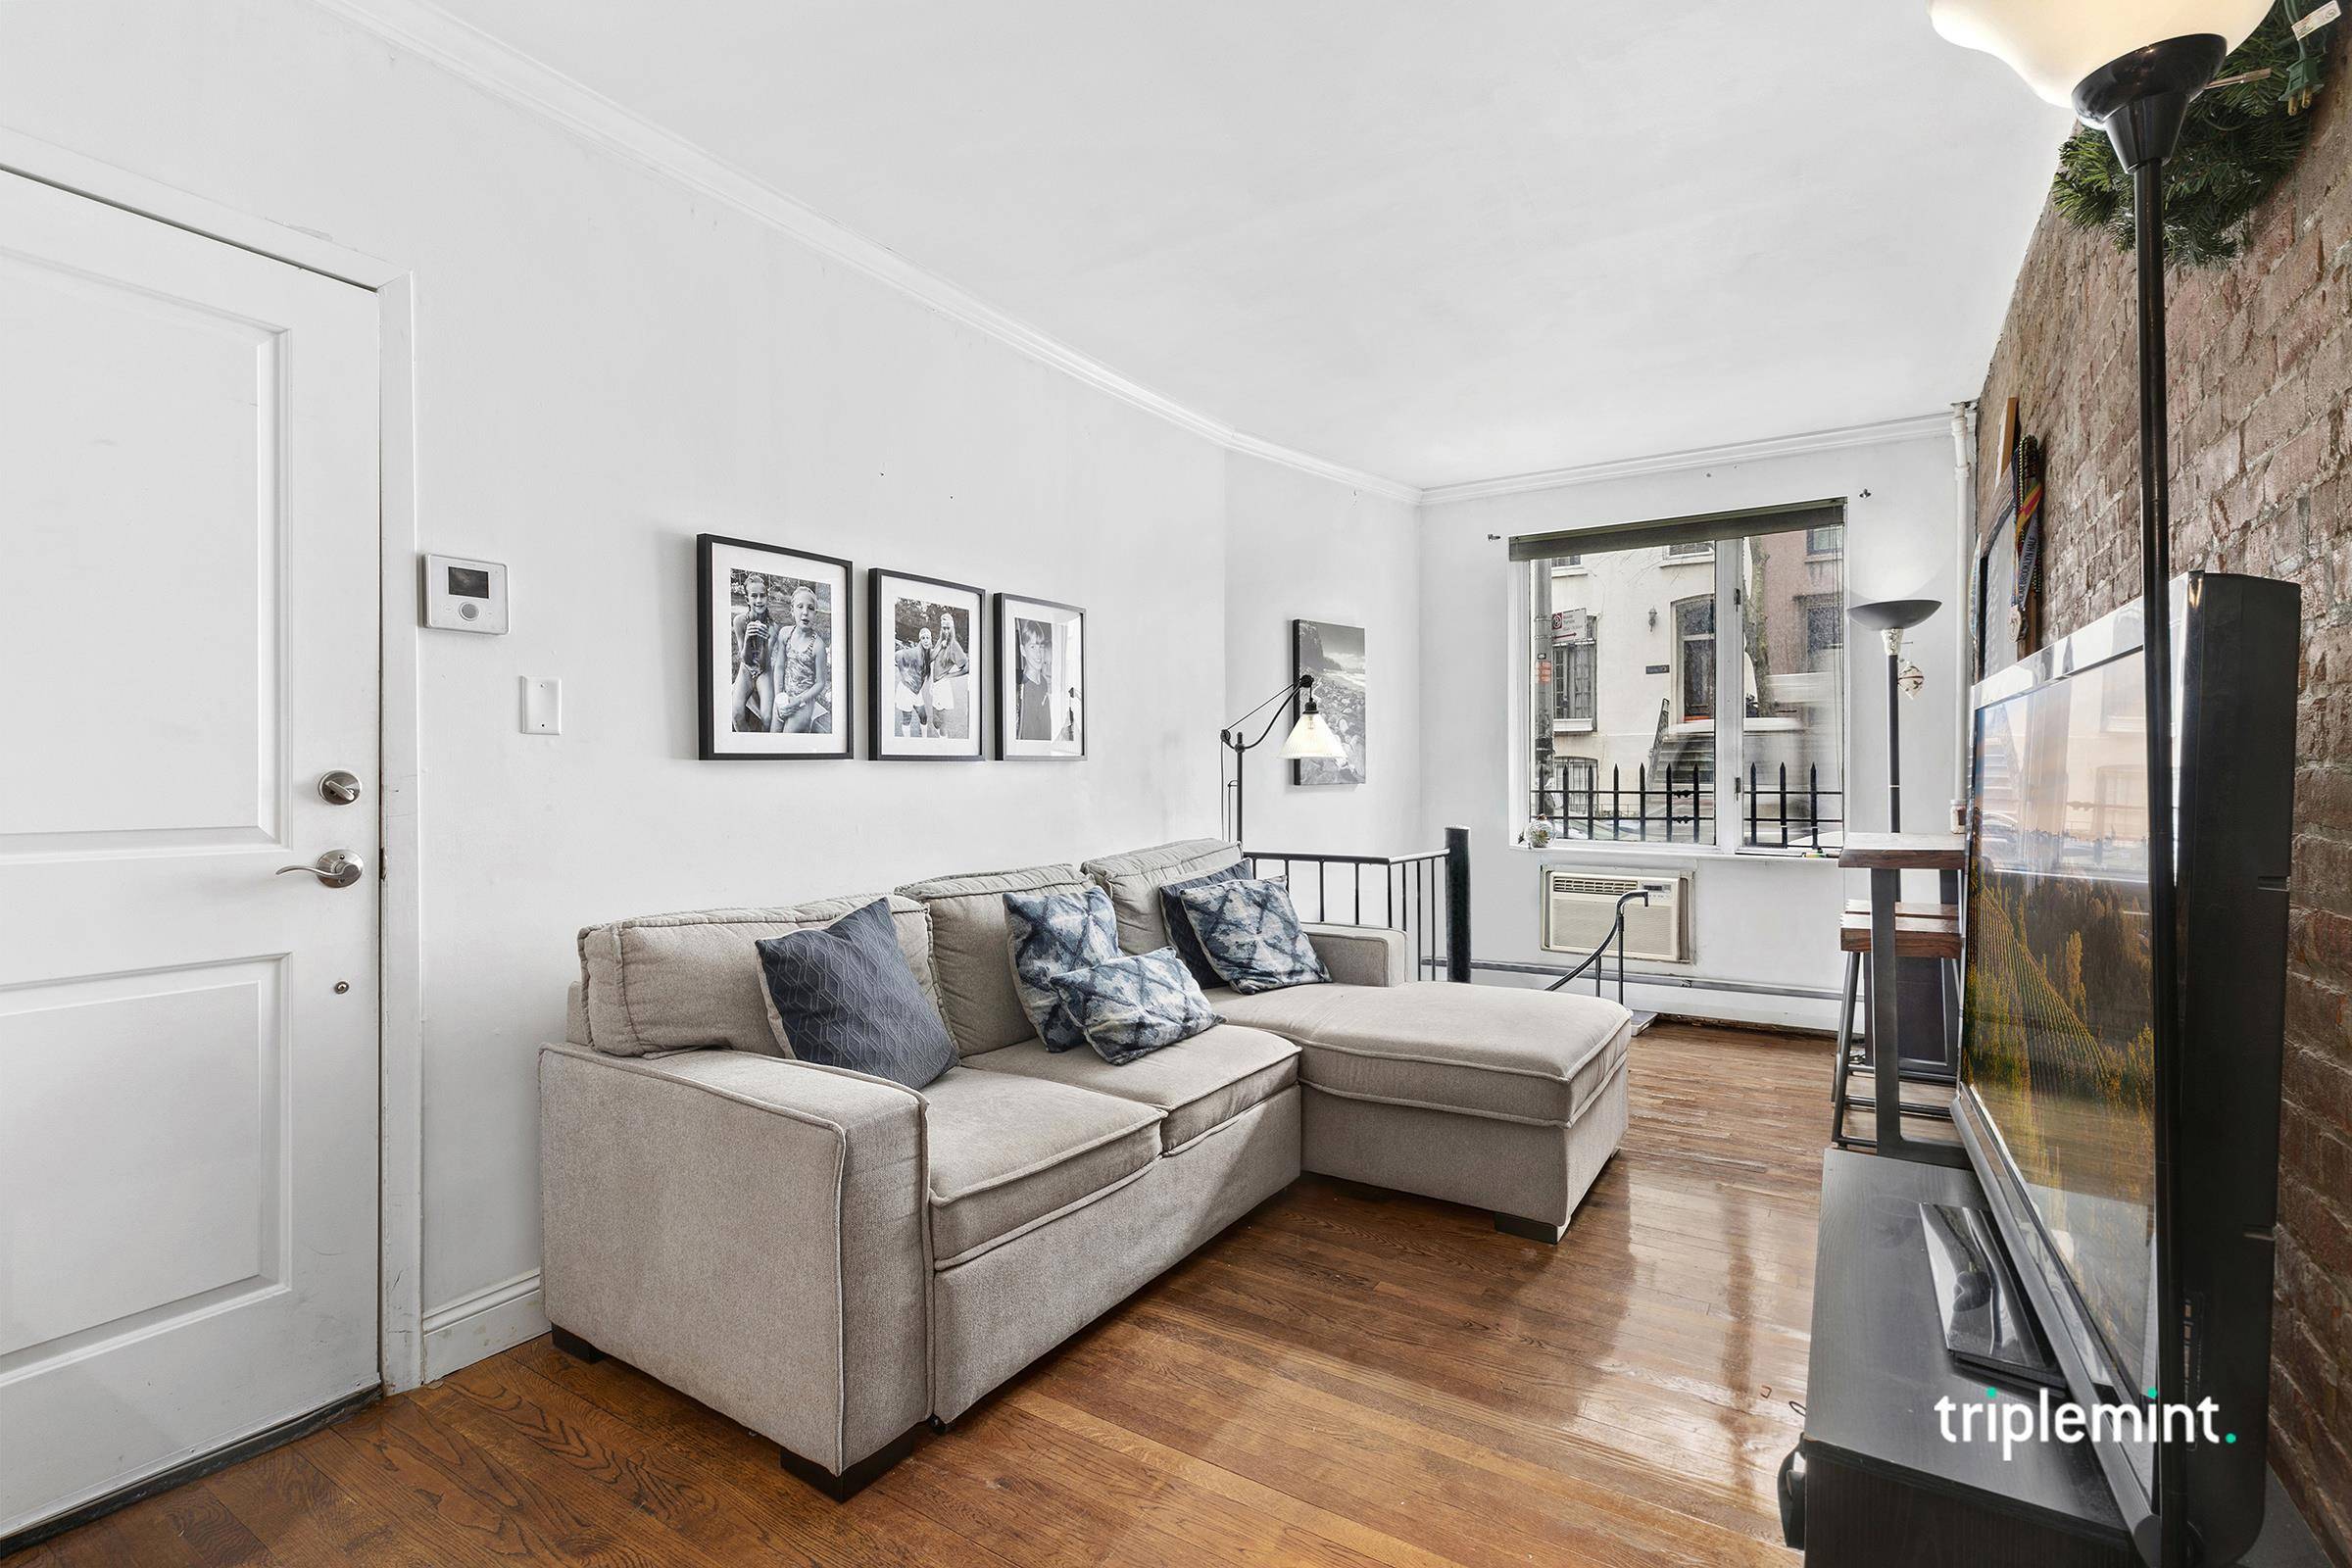 Charming duplex 2 bedroom apartment in an 1850's townhouse with no board approval necessary.